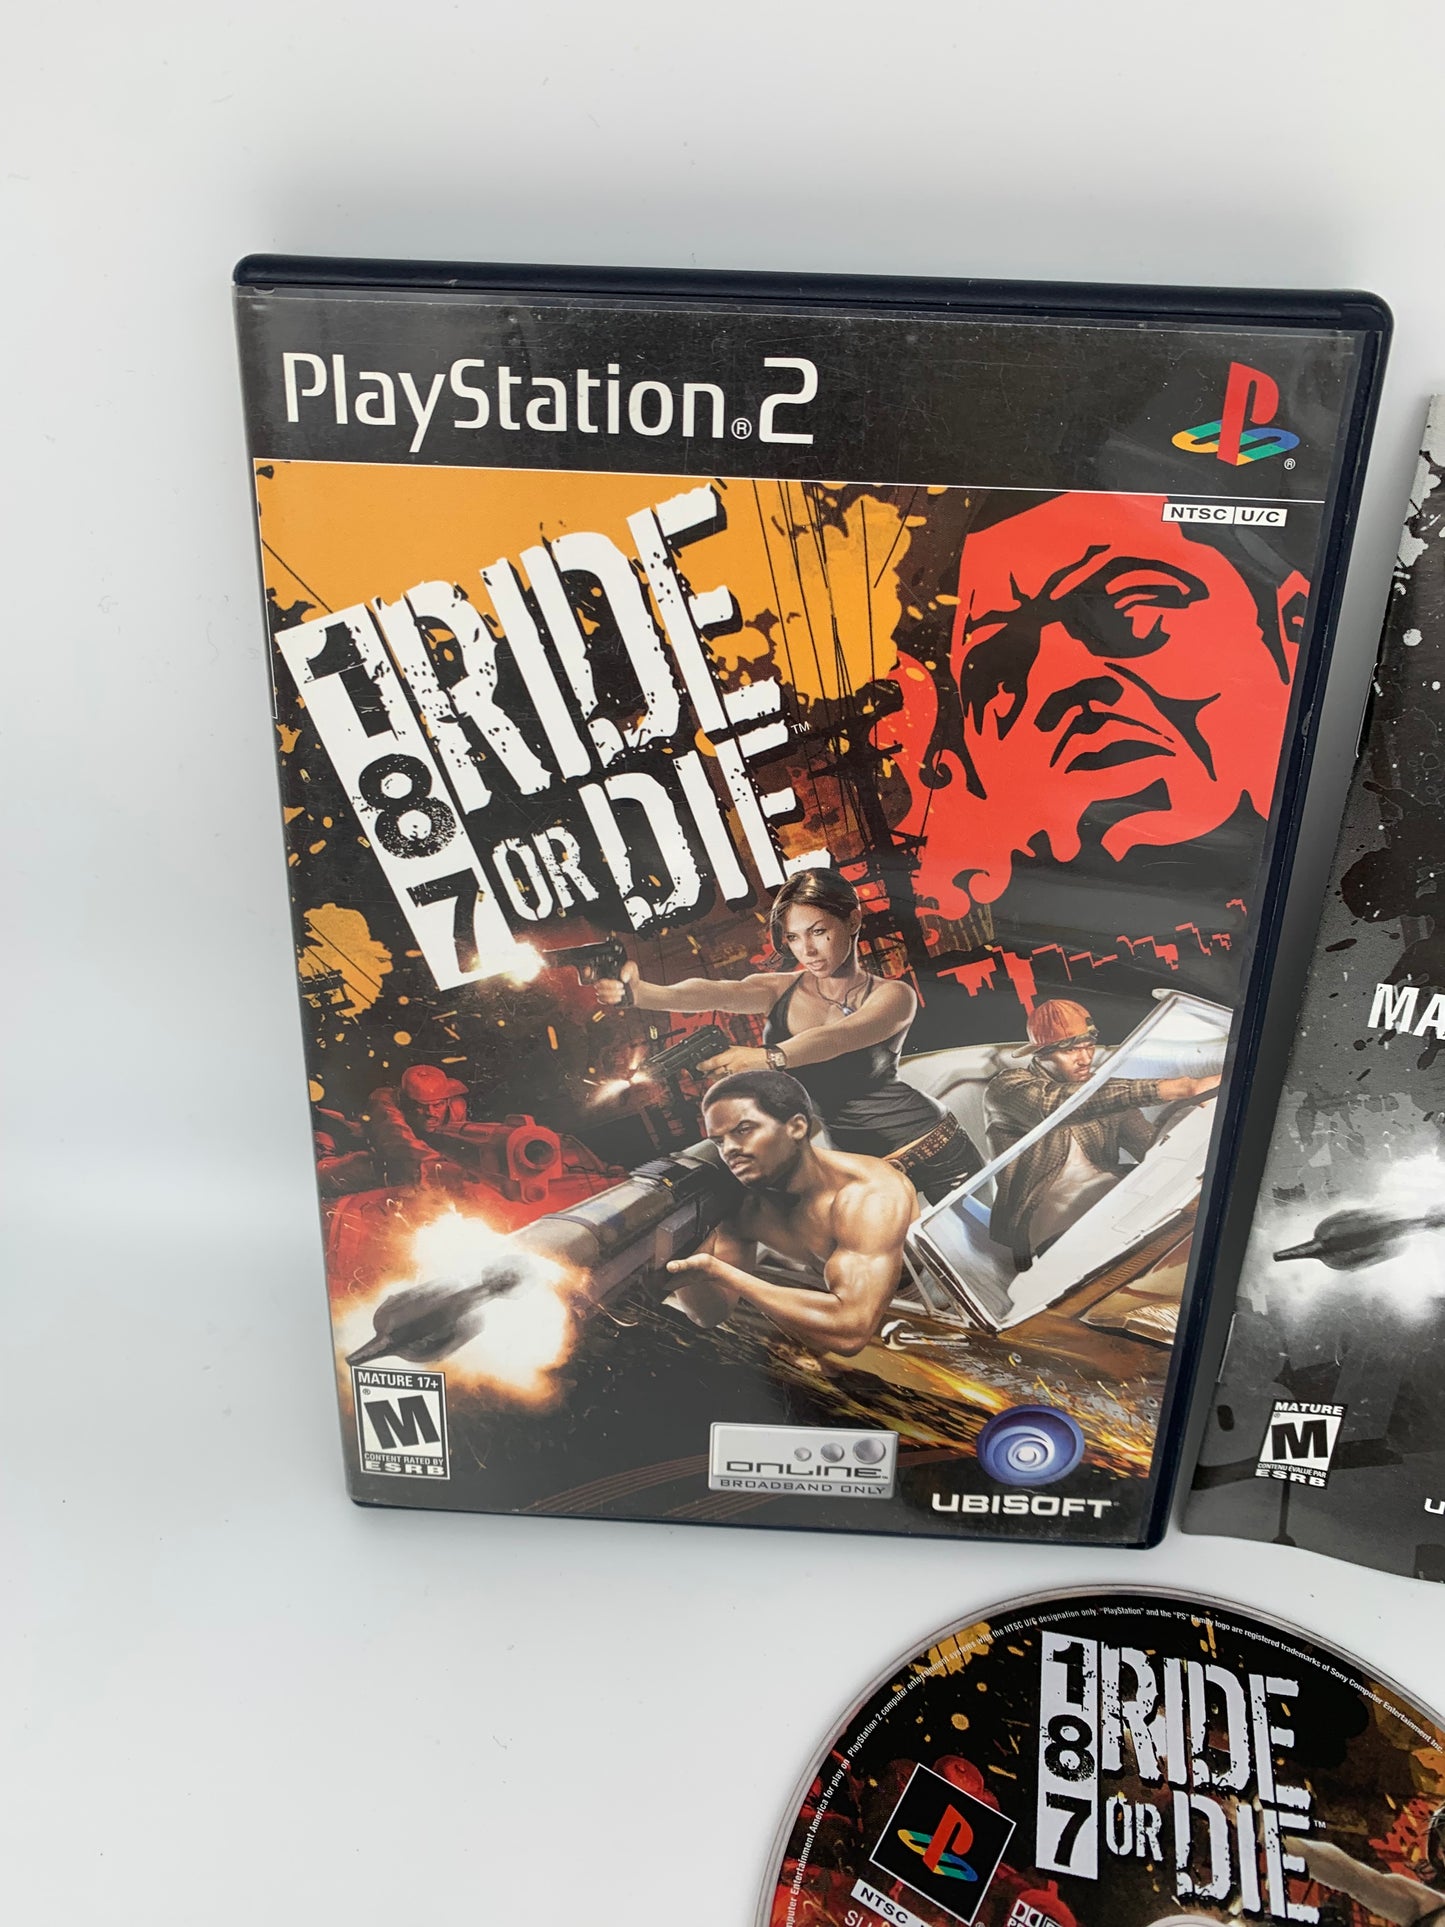 SONY PLAYSTATiON 2 [PS2] | 187 RiDE OR DiE